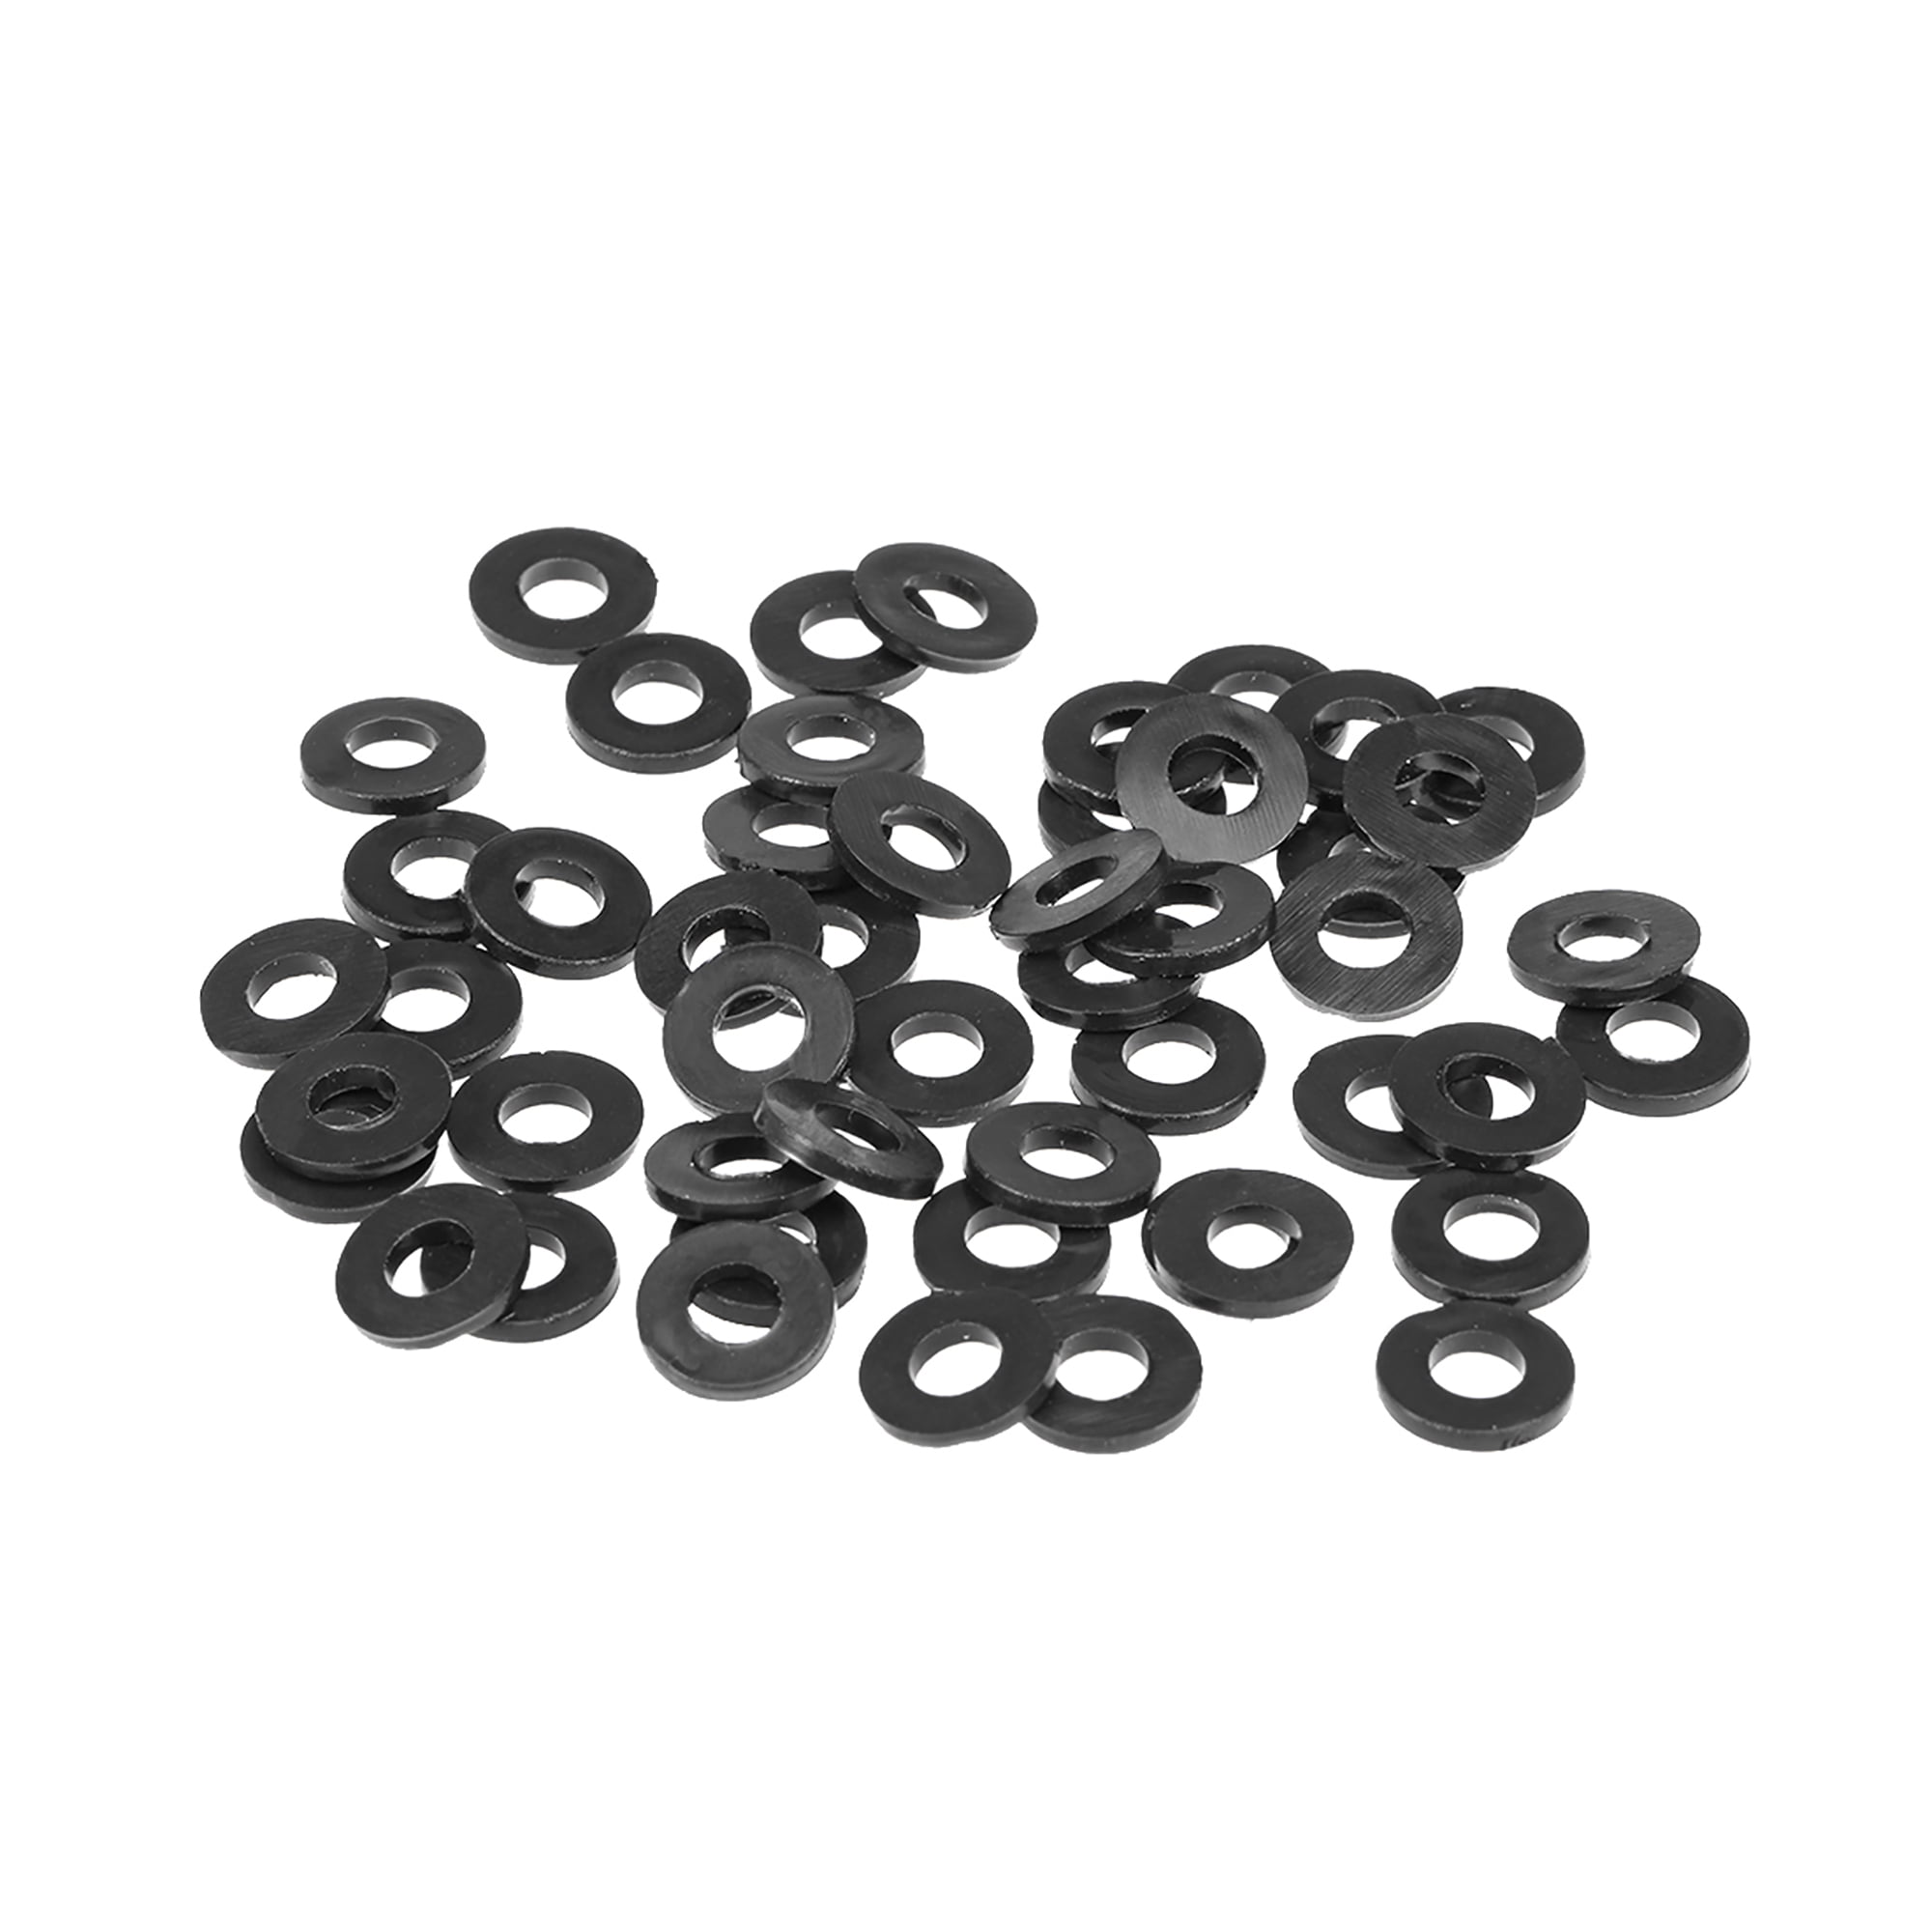 sourcingmap Rubber Flat Washers 12mm OD 5mm ID 1mm Thickness for Faucet Pipe Water Hose Pack of 100 